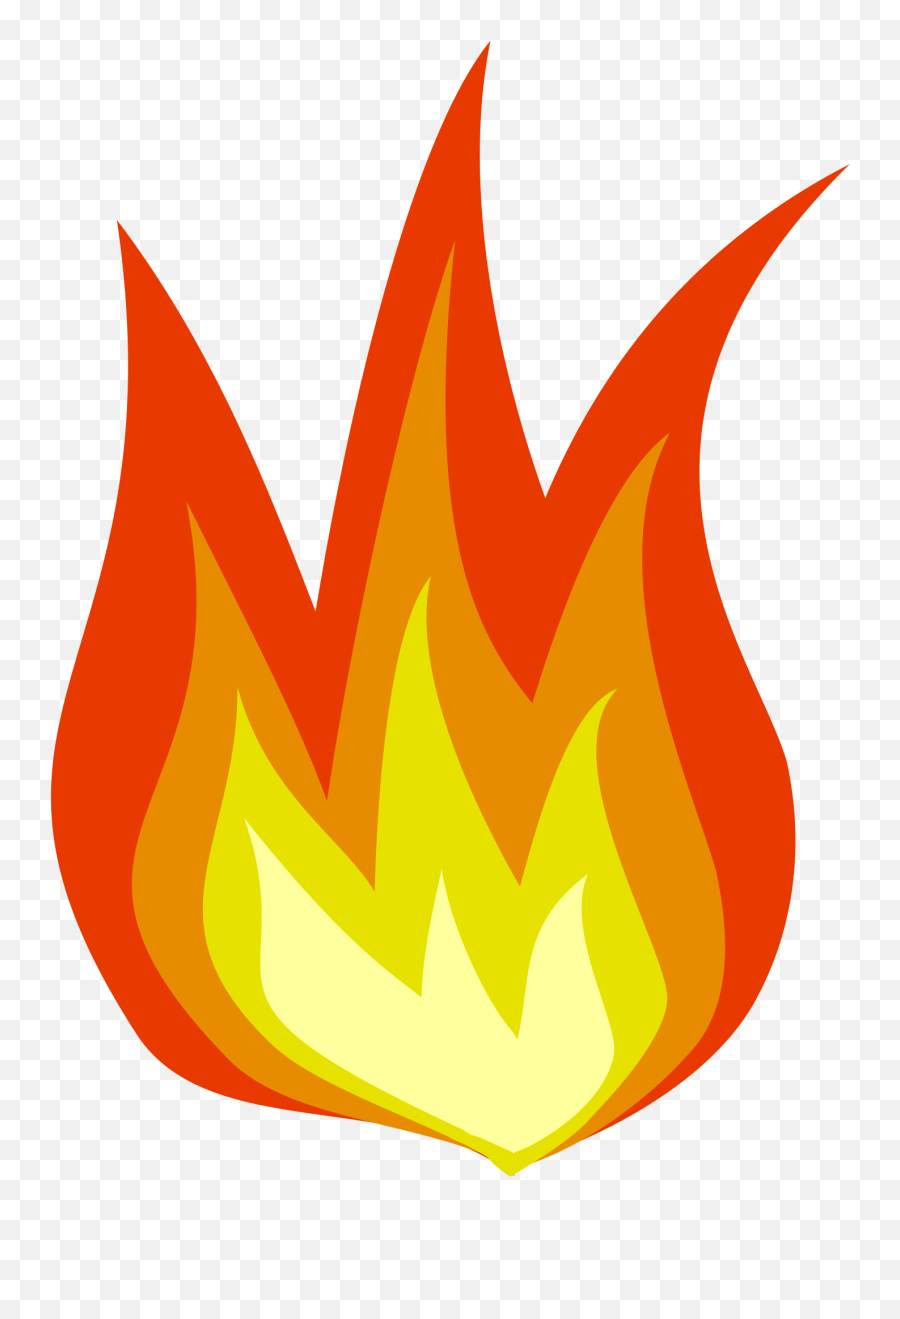 Free Free Pictures Of Fire Download Free Clip Art Free - Flames Cartoon Emoji,Fire Extinguisher Clipart